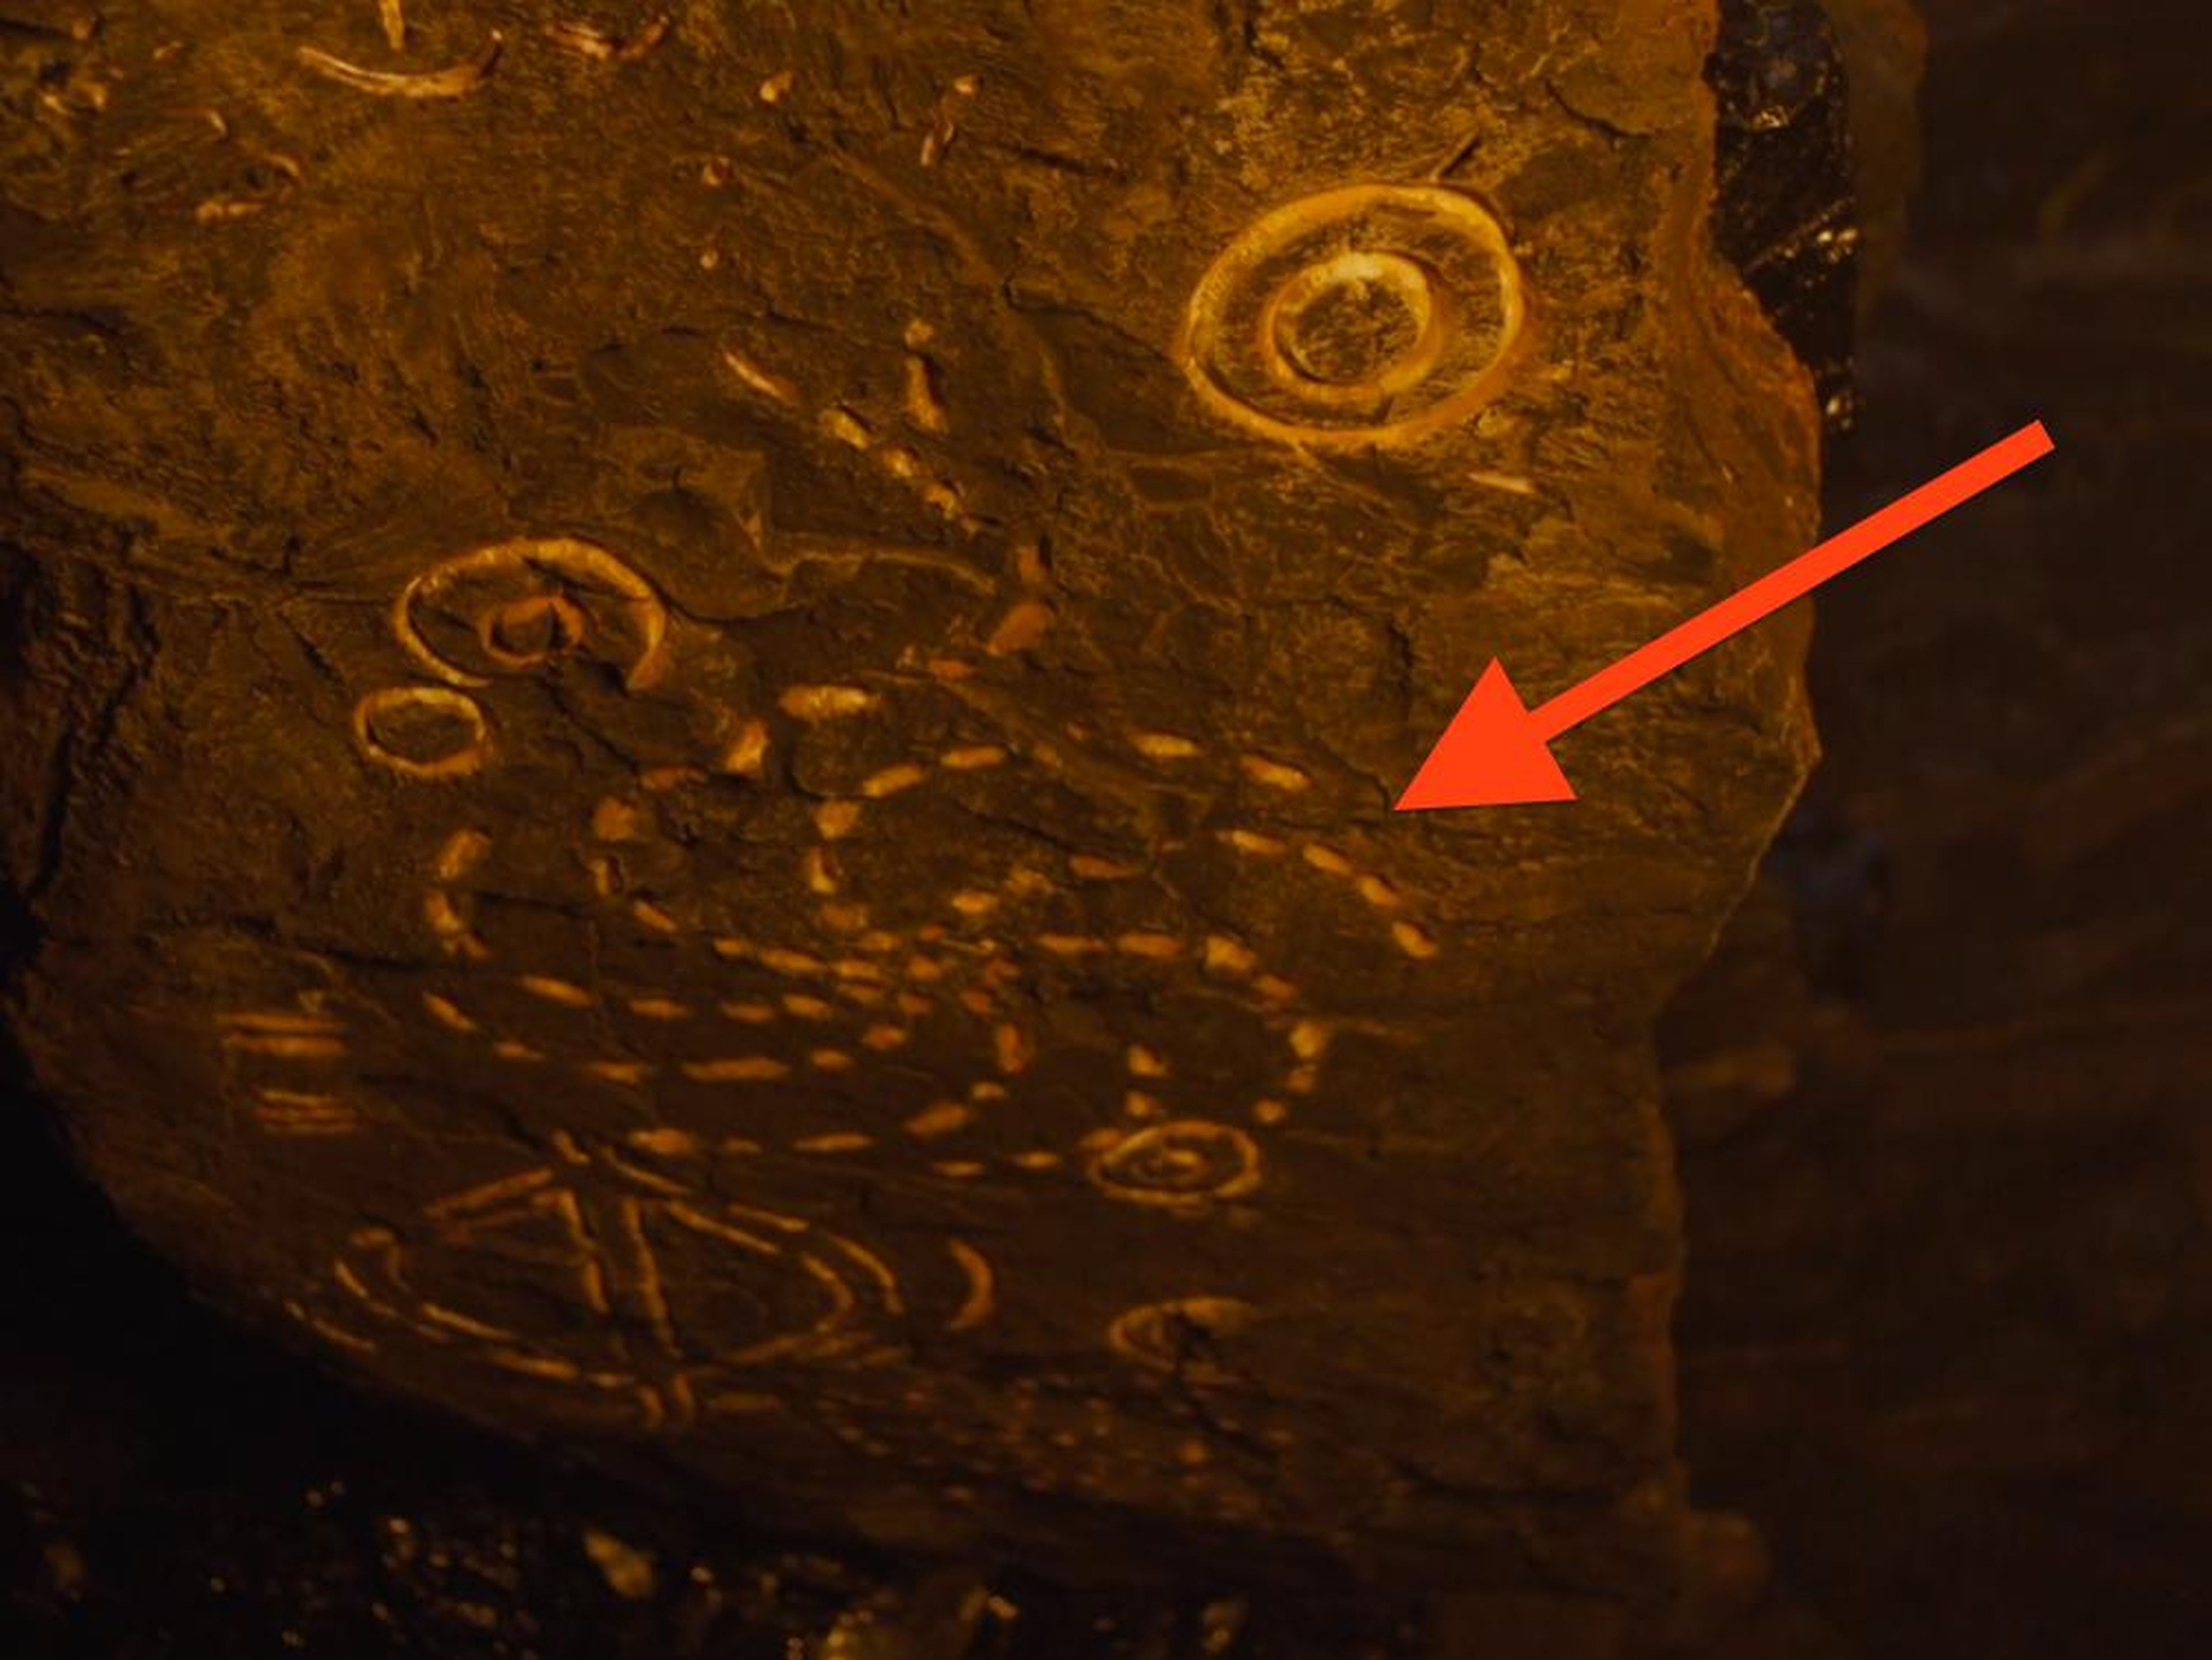 We last saw this spiral inside the dragonglass caves on Dragonstone.